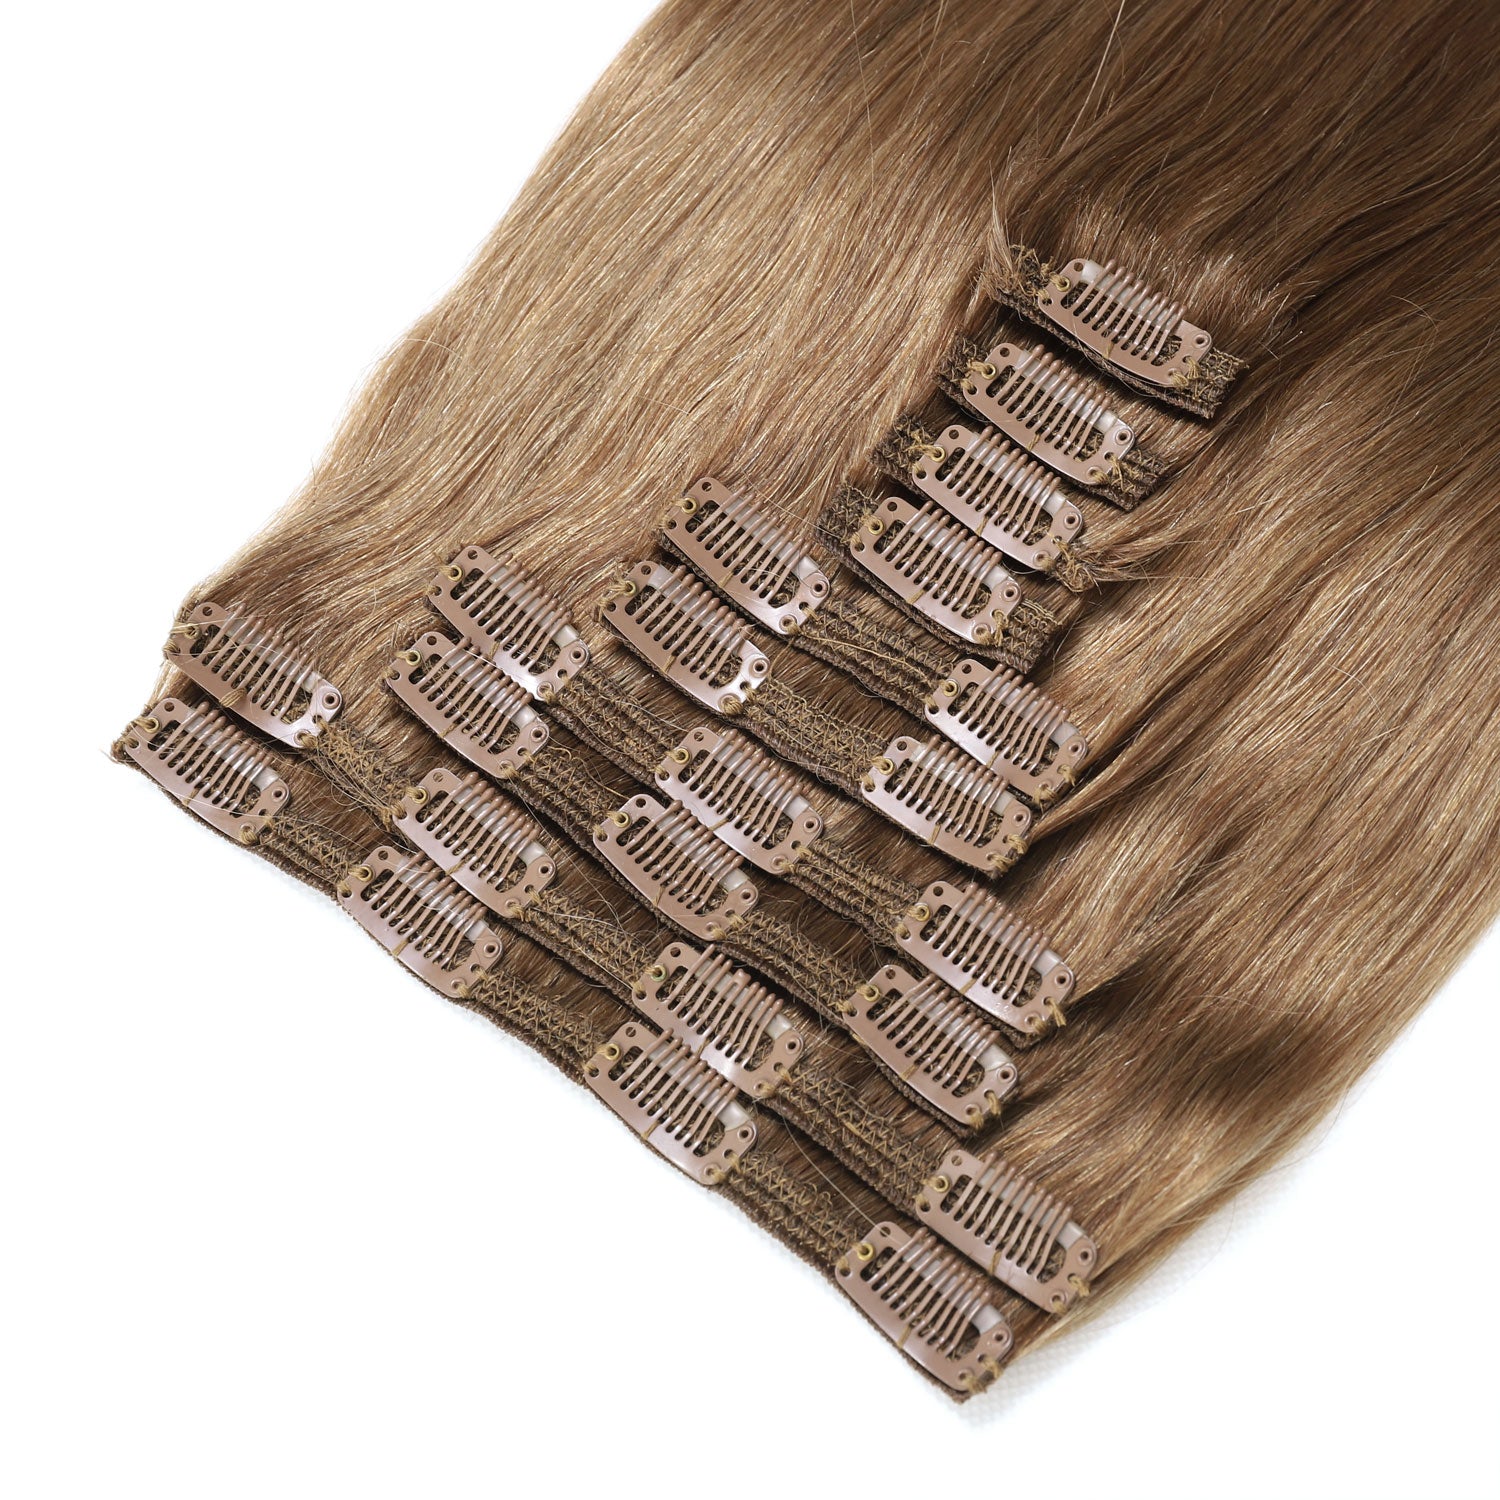 Real Natural Human Hair Extensions with Clip In Hair Extensions for Length and volume.